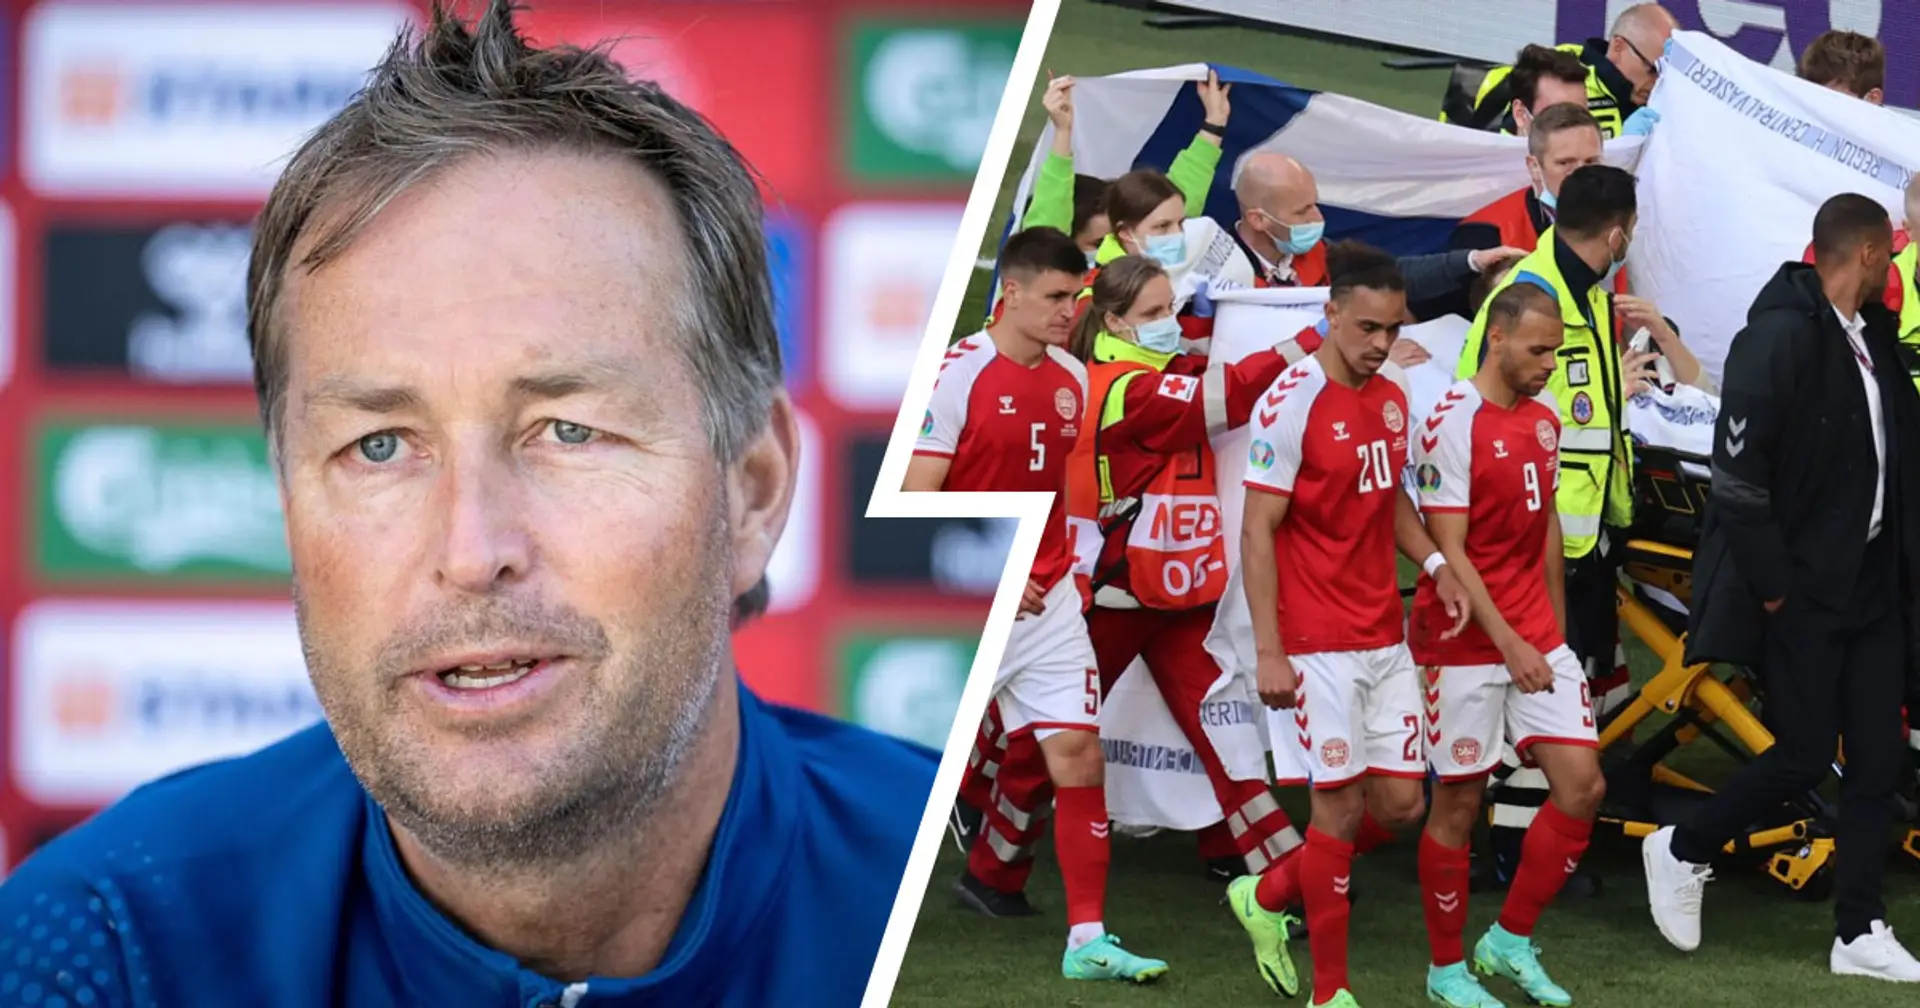 Denmark boss Hjulmand: ‘Covid-19 allows you to postpone a match for 48 hours but a cardiac arrest doesn’t. That’s wrong.’